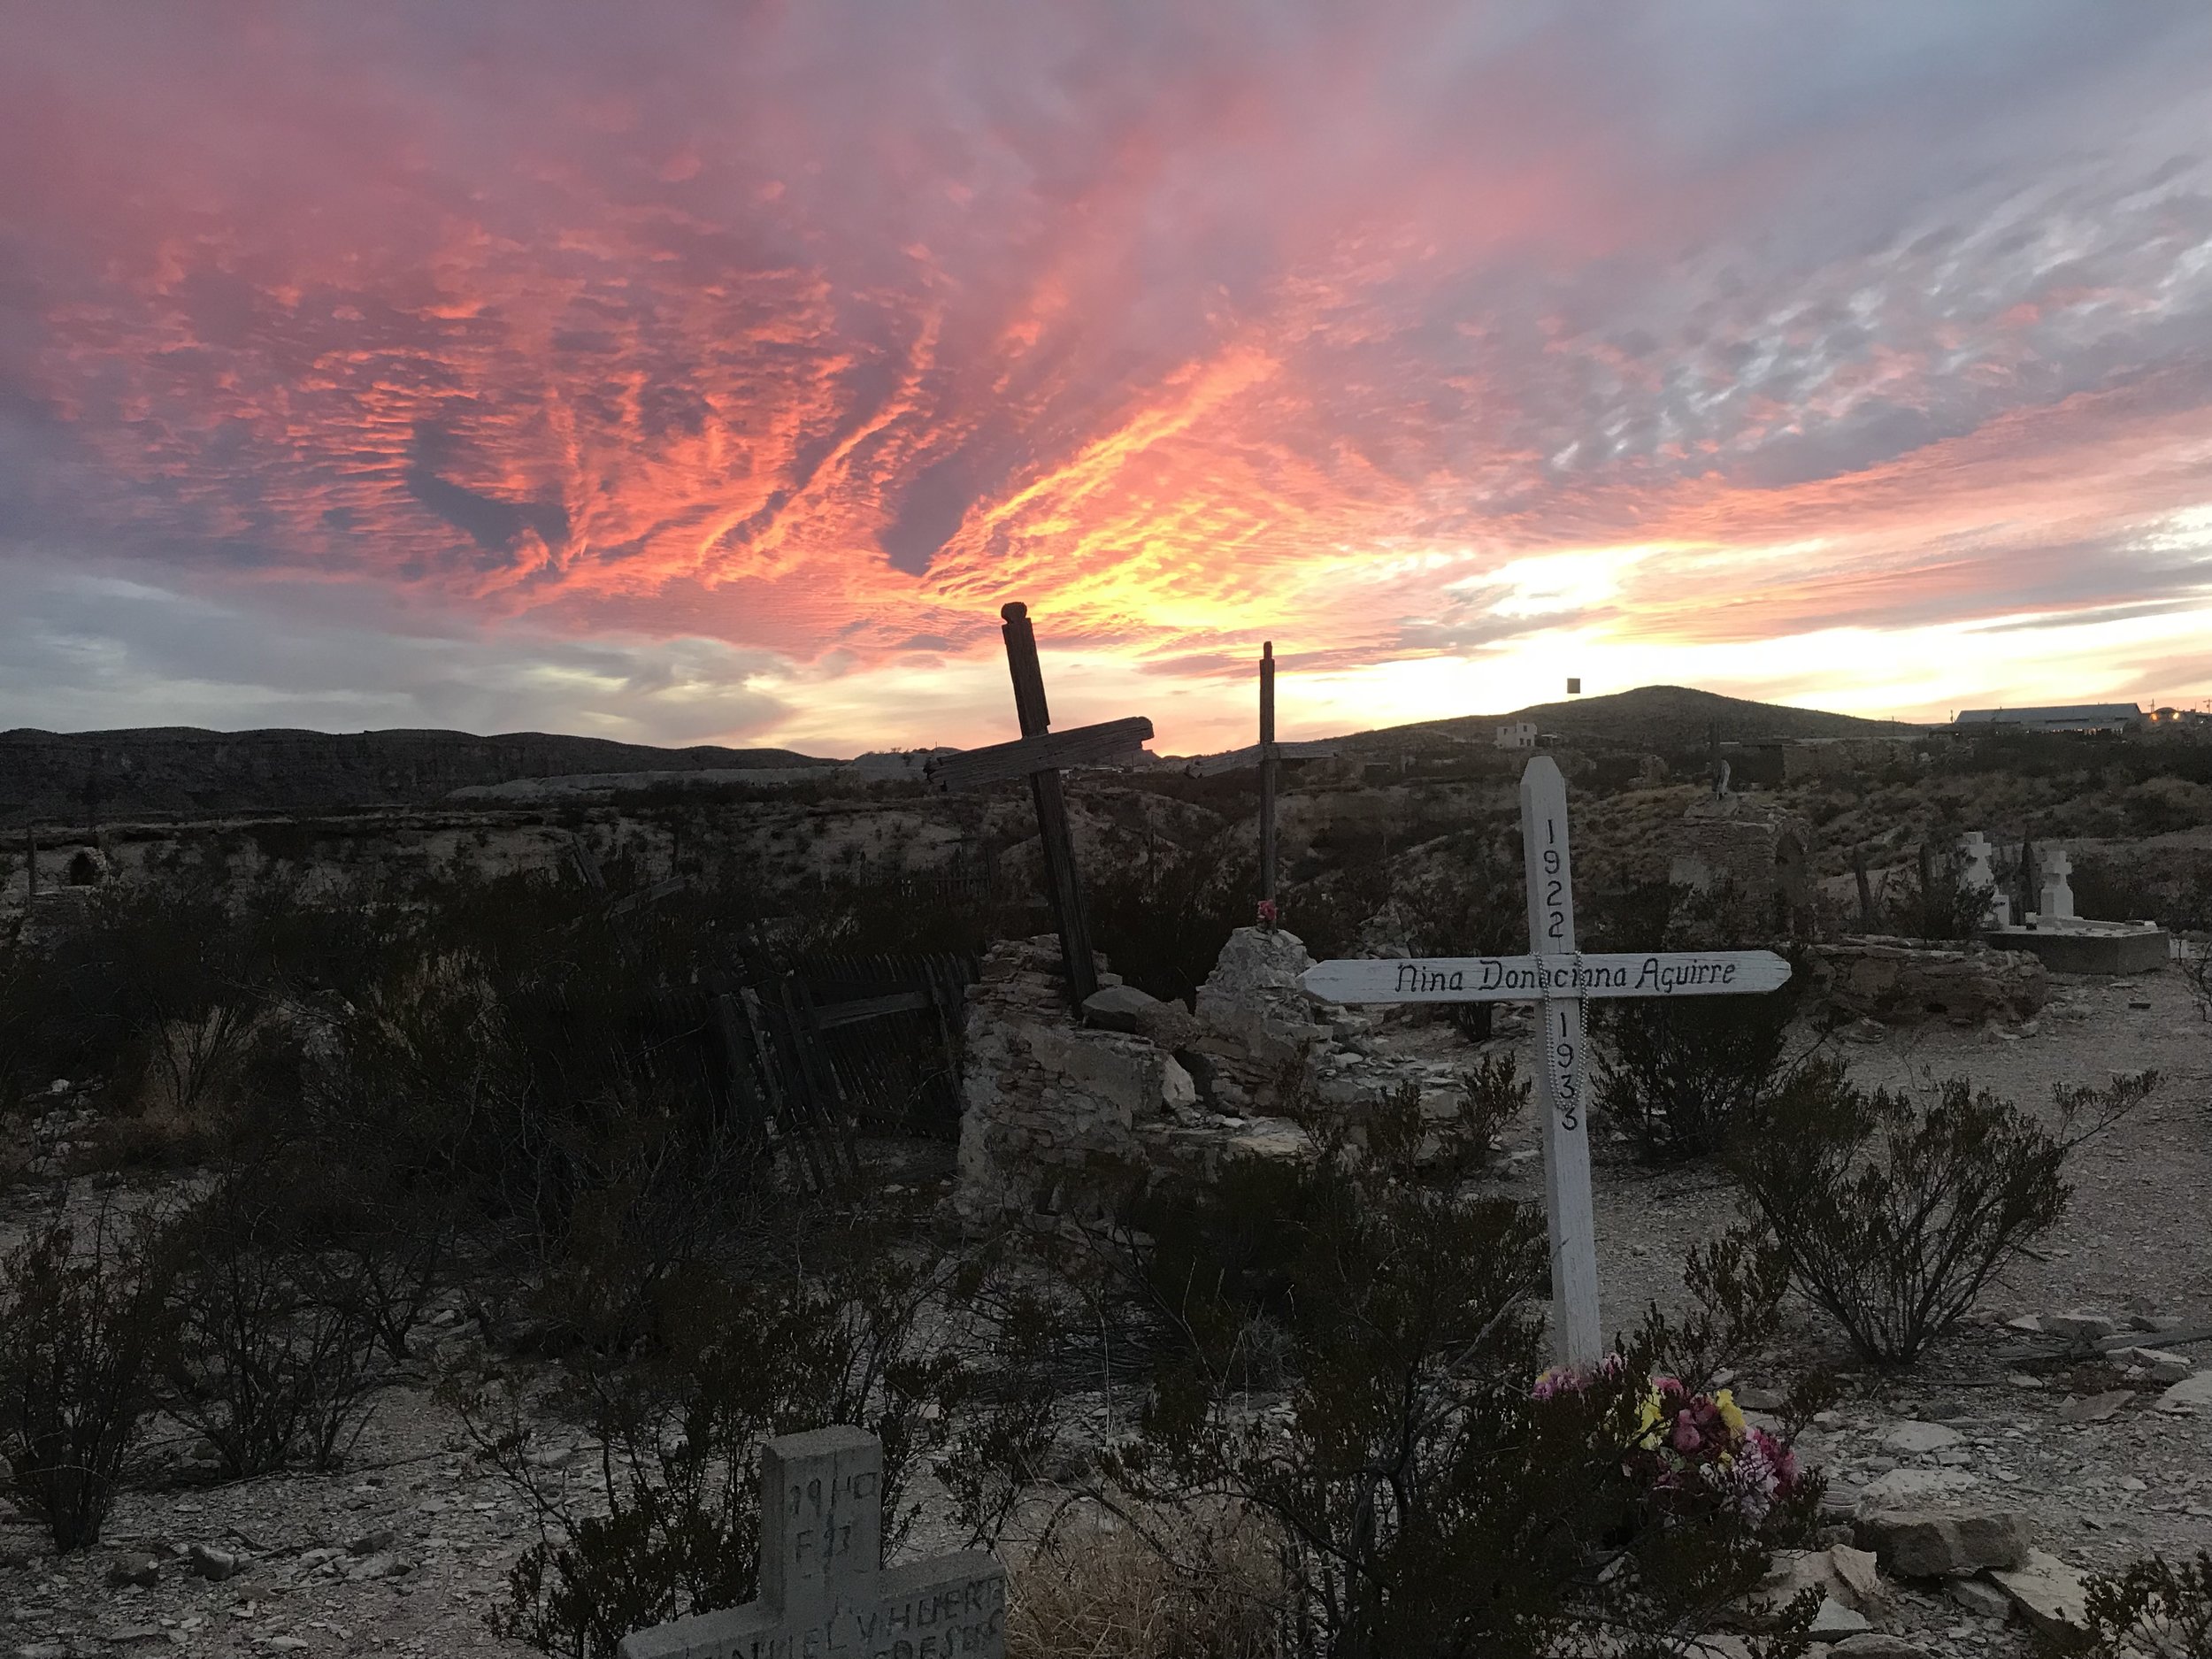  The cemetery in Terlingua, Texas, which calls itself a ghost town, is still active.      